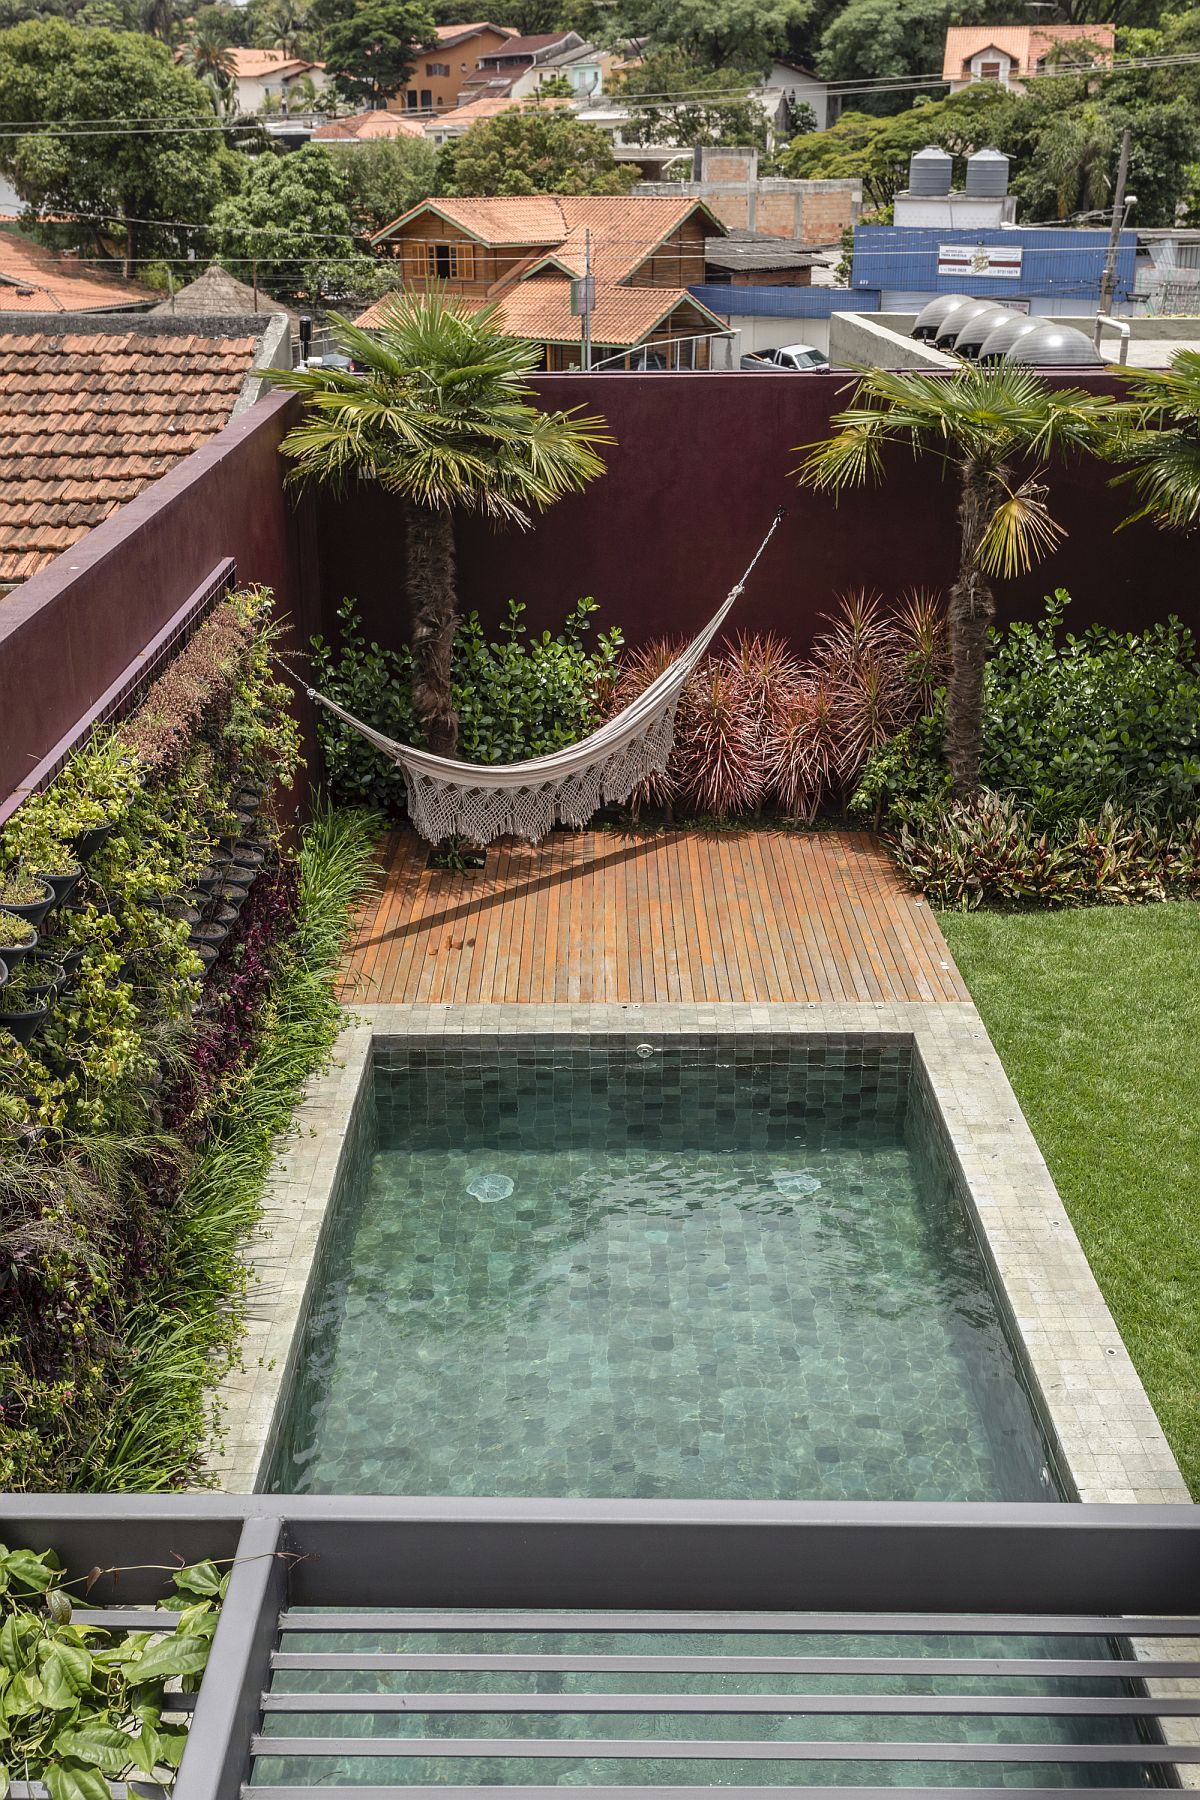 High-walls-for-the-garden-give-the-homeowners-ample-privacy-11844